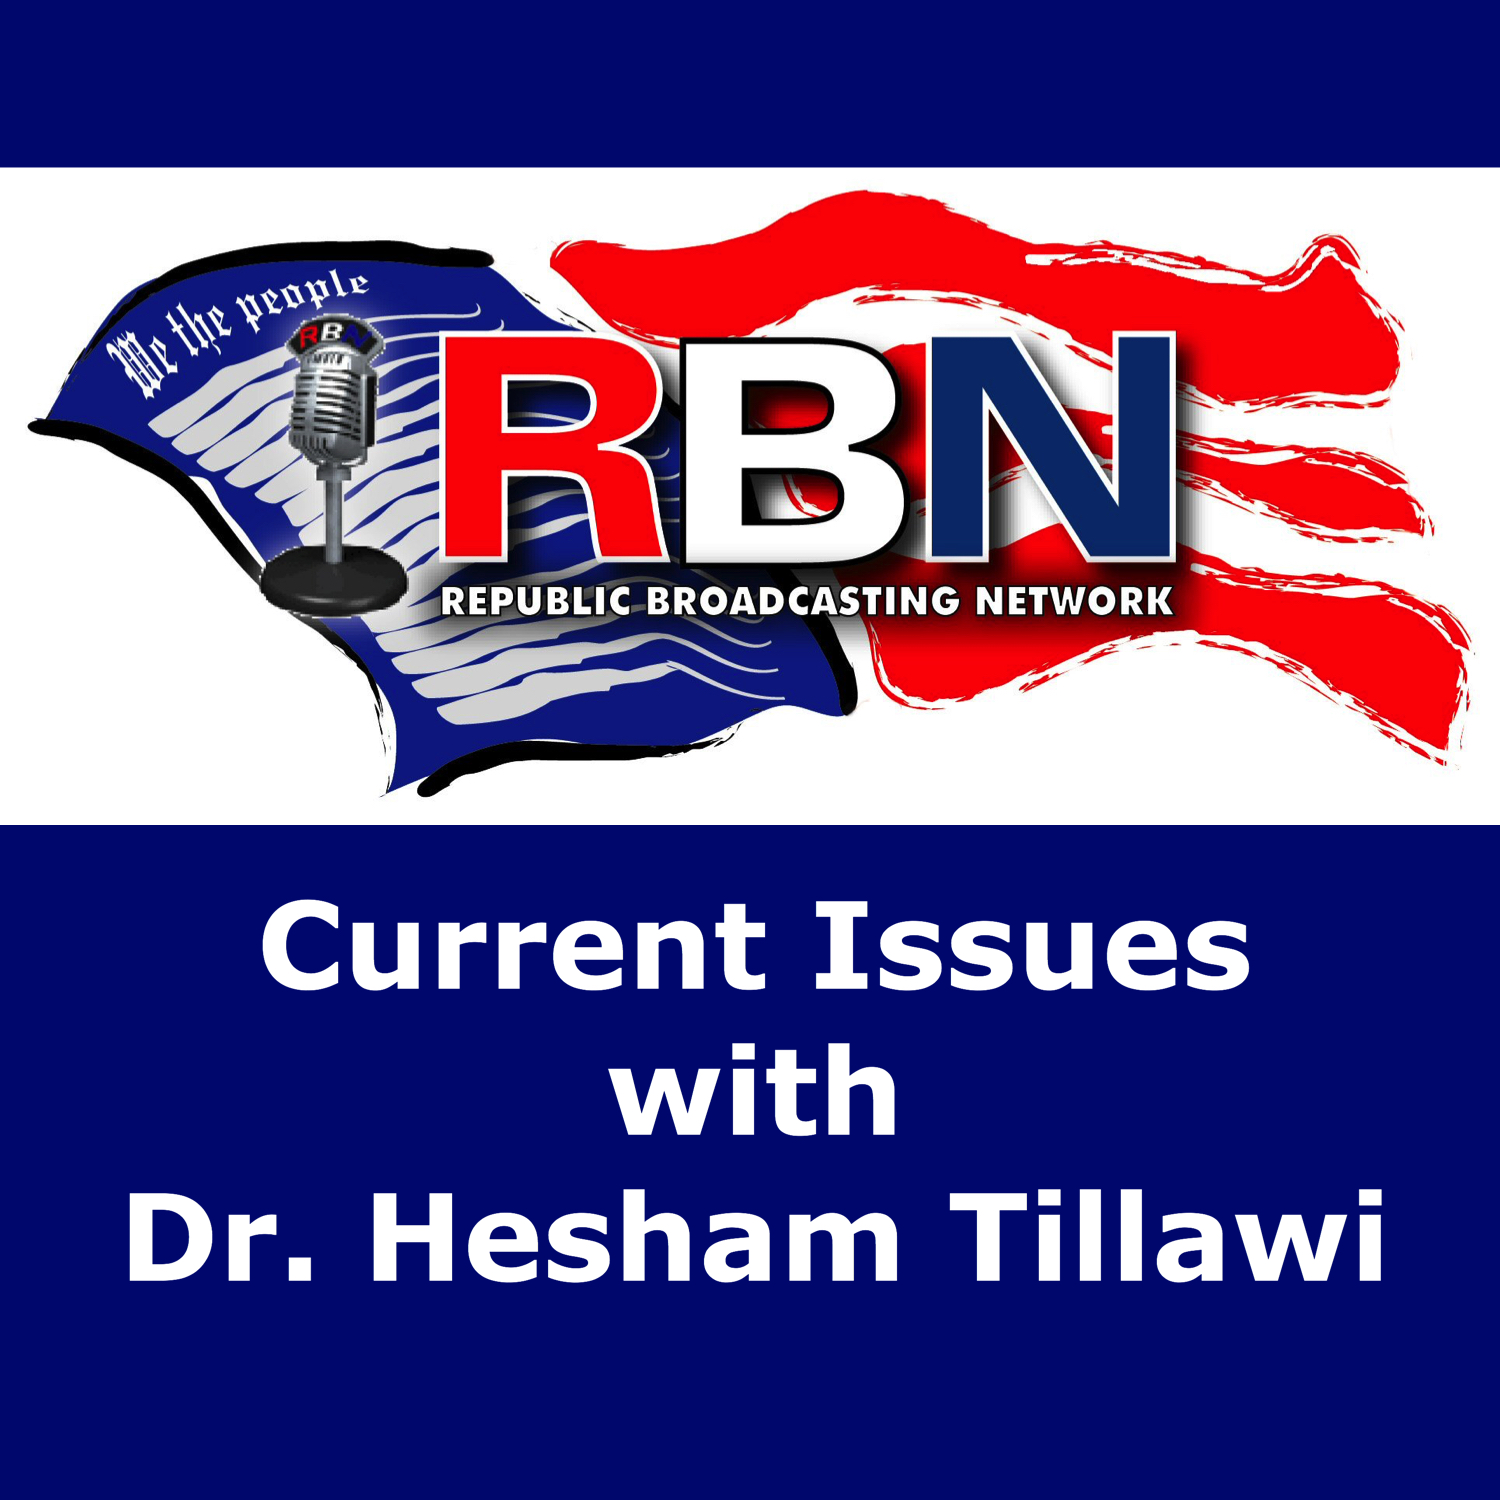 Current Issues with Dr. Hesham Tillawi